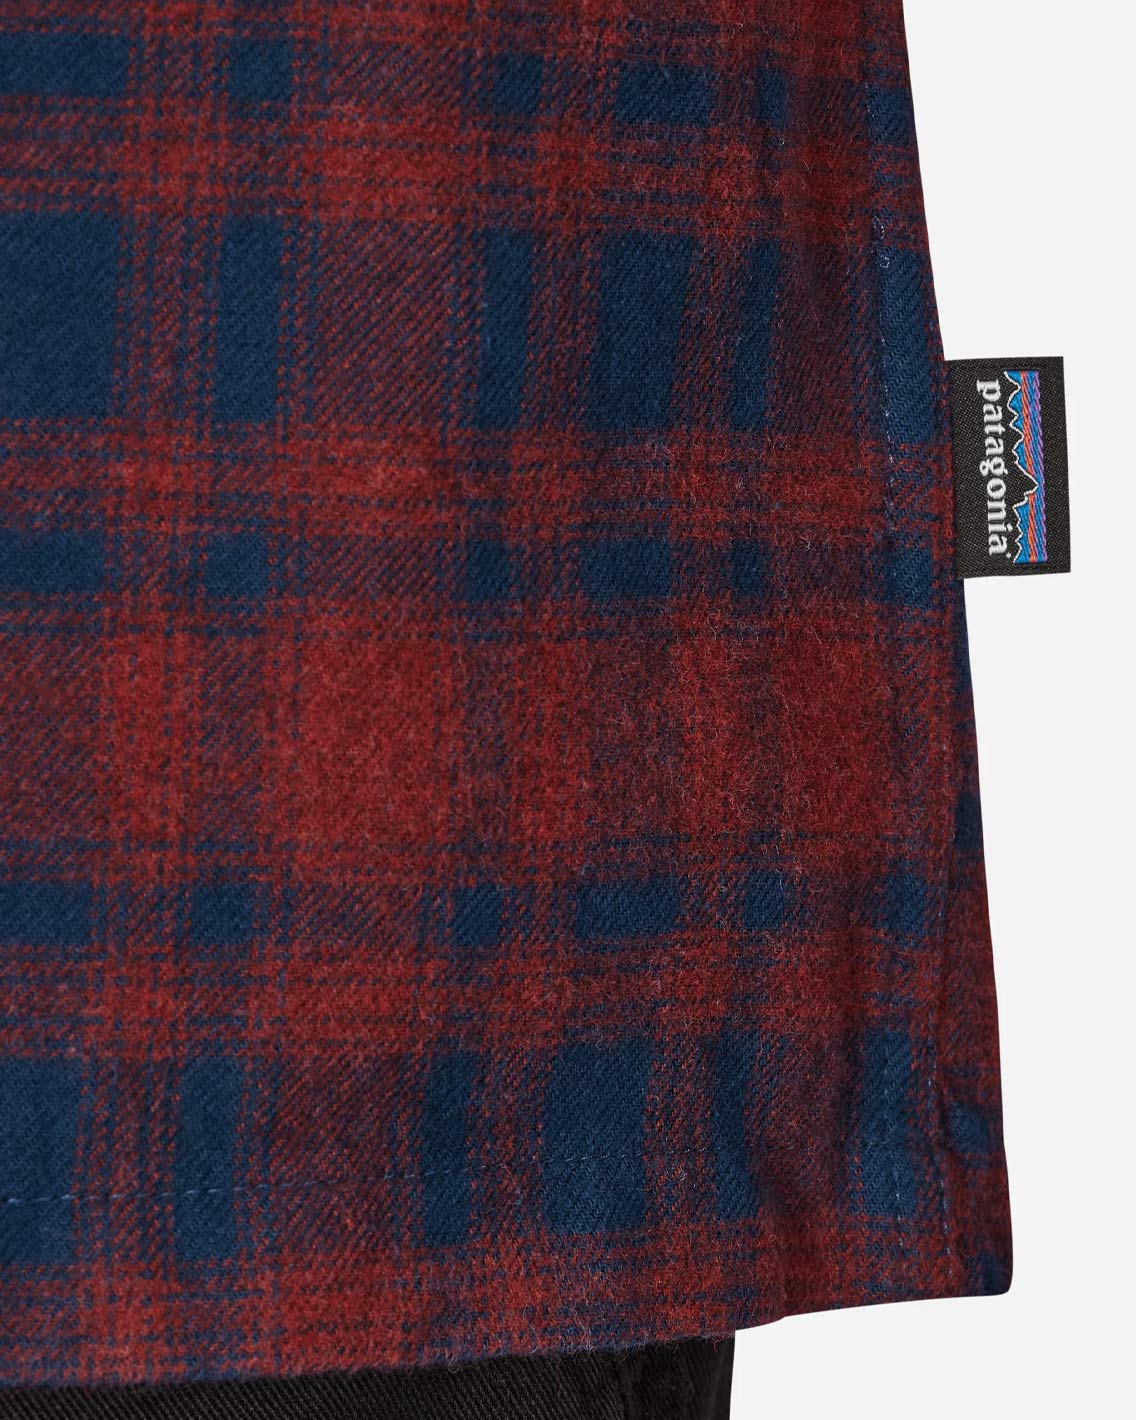 Patagonia - M's L/S Organic Cotton Fjord Flannel Shirt - Sequoia Red